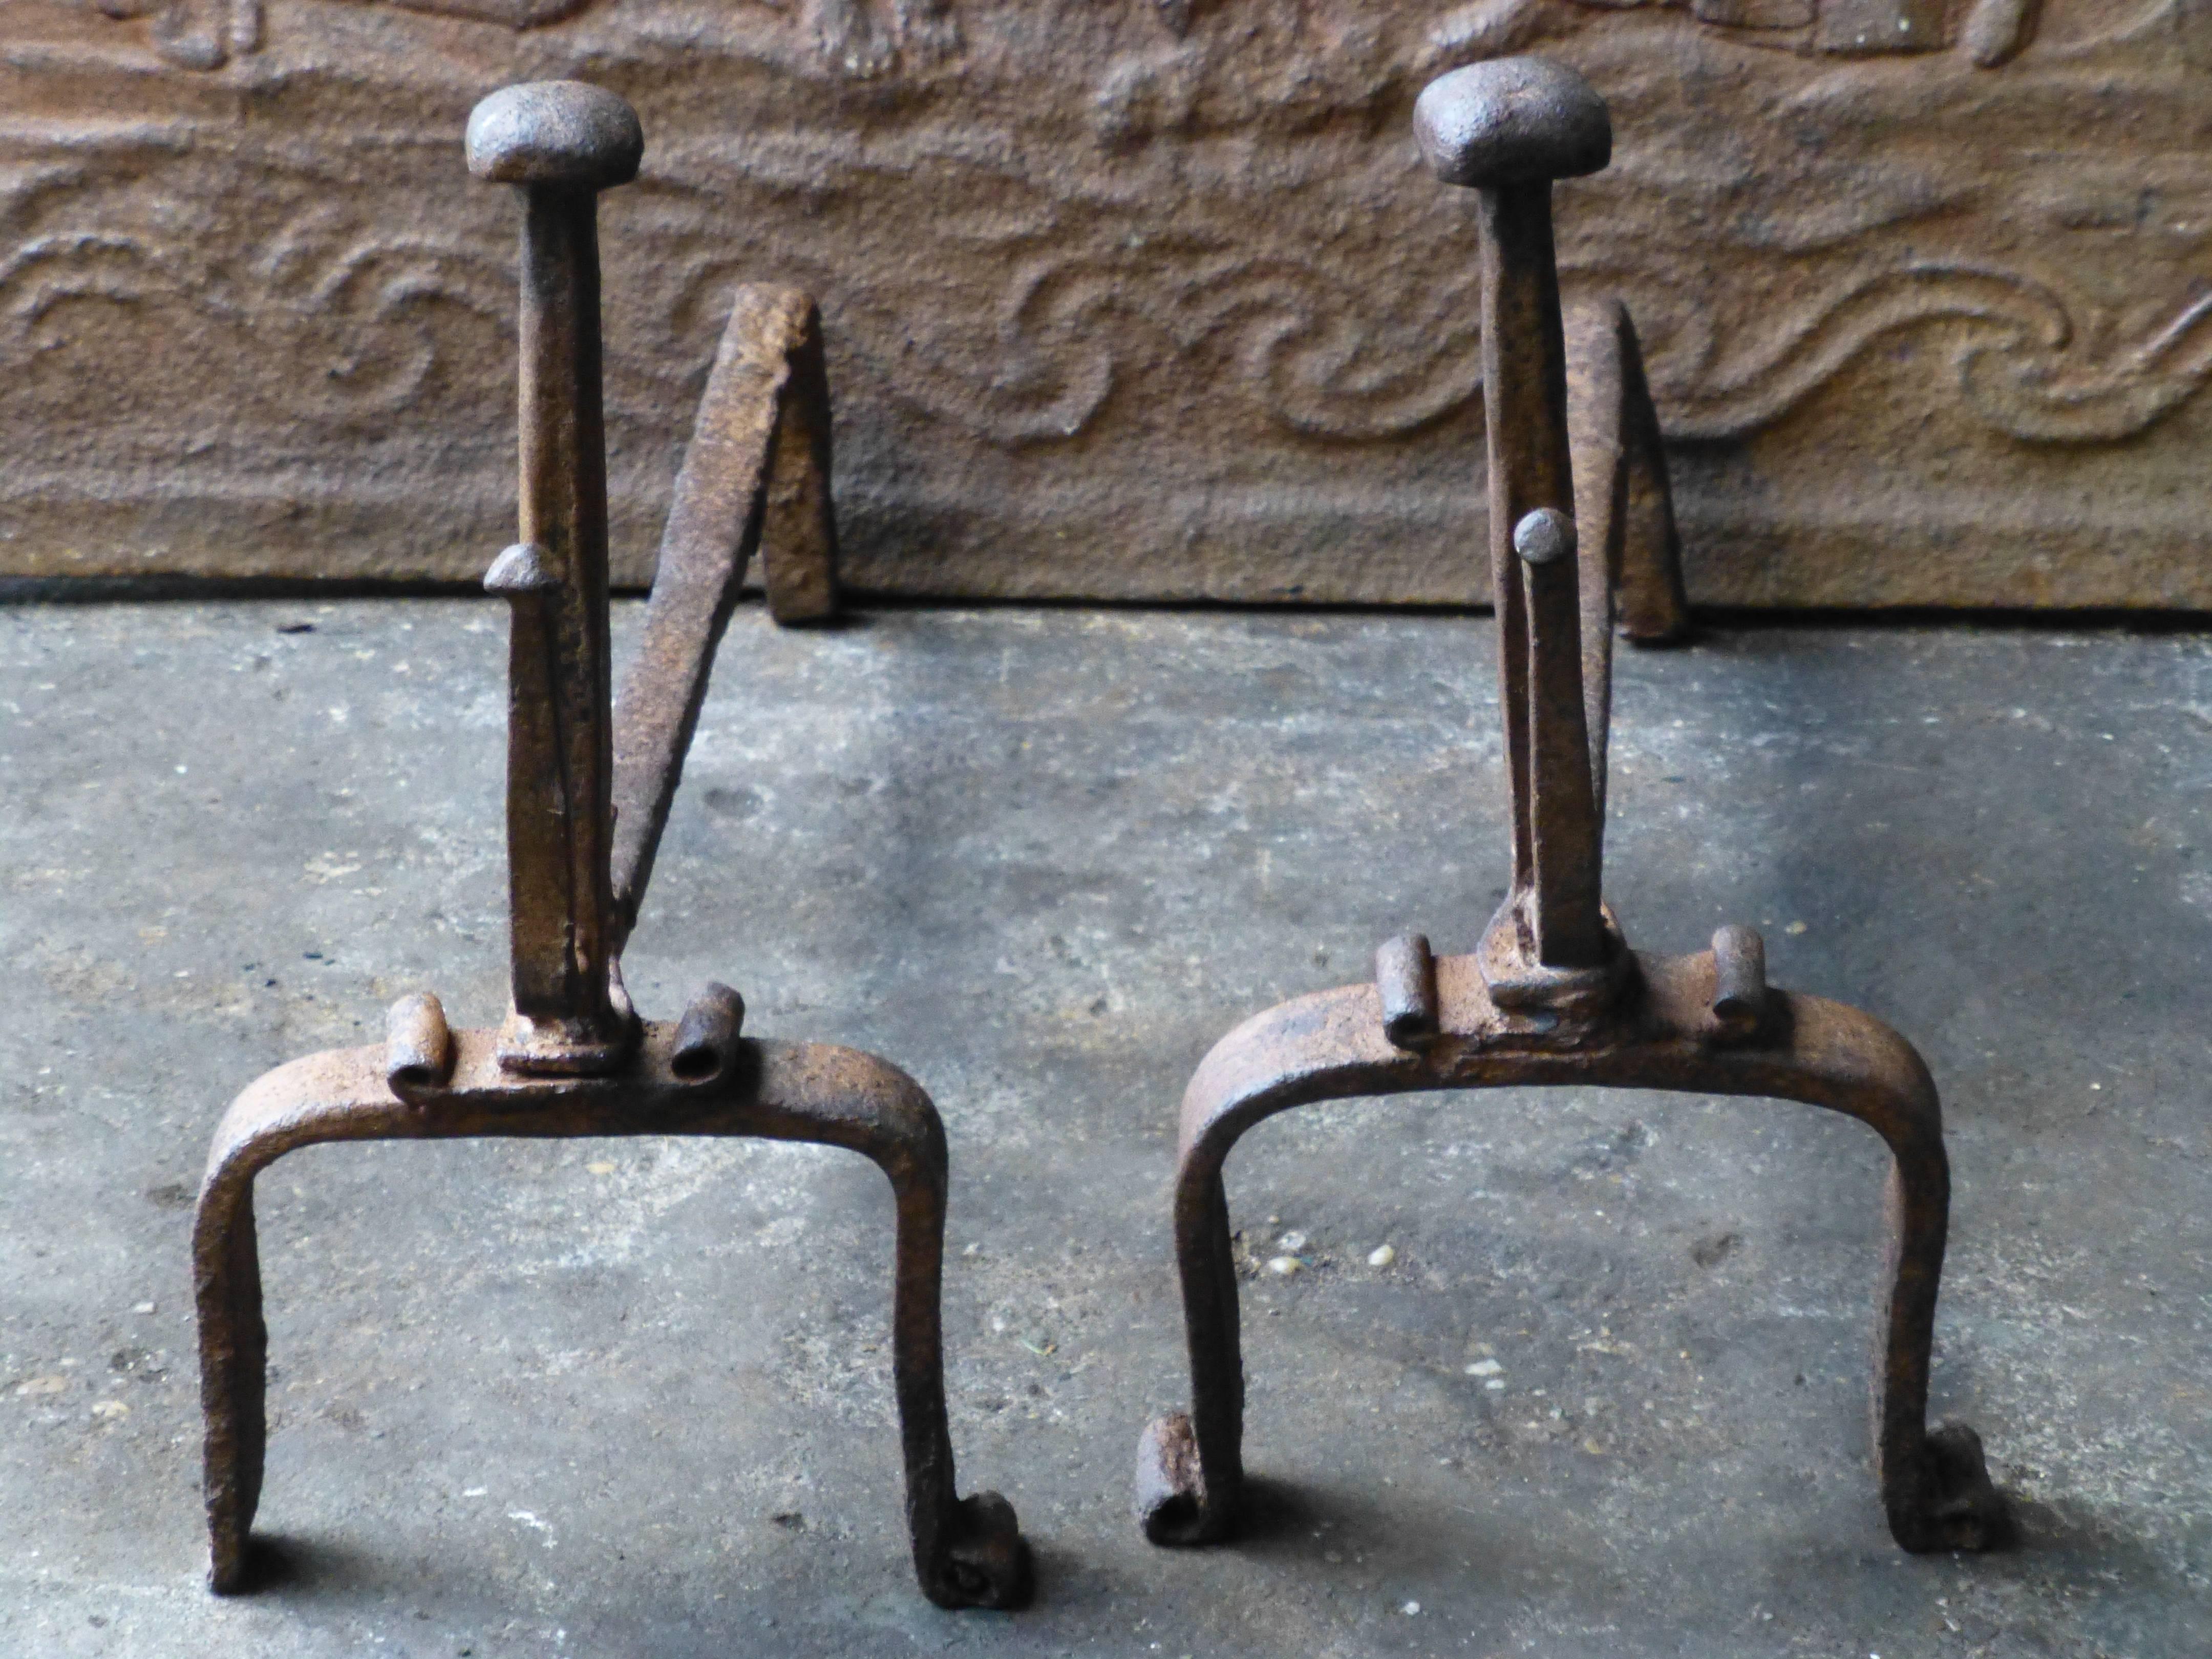 18th century Louis XV period andirons. With spit hooks to grill food. Made of hand forged wrought iron. The condition is good.